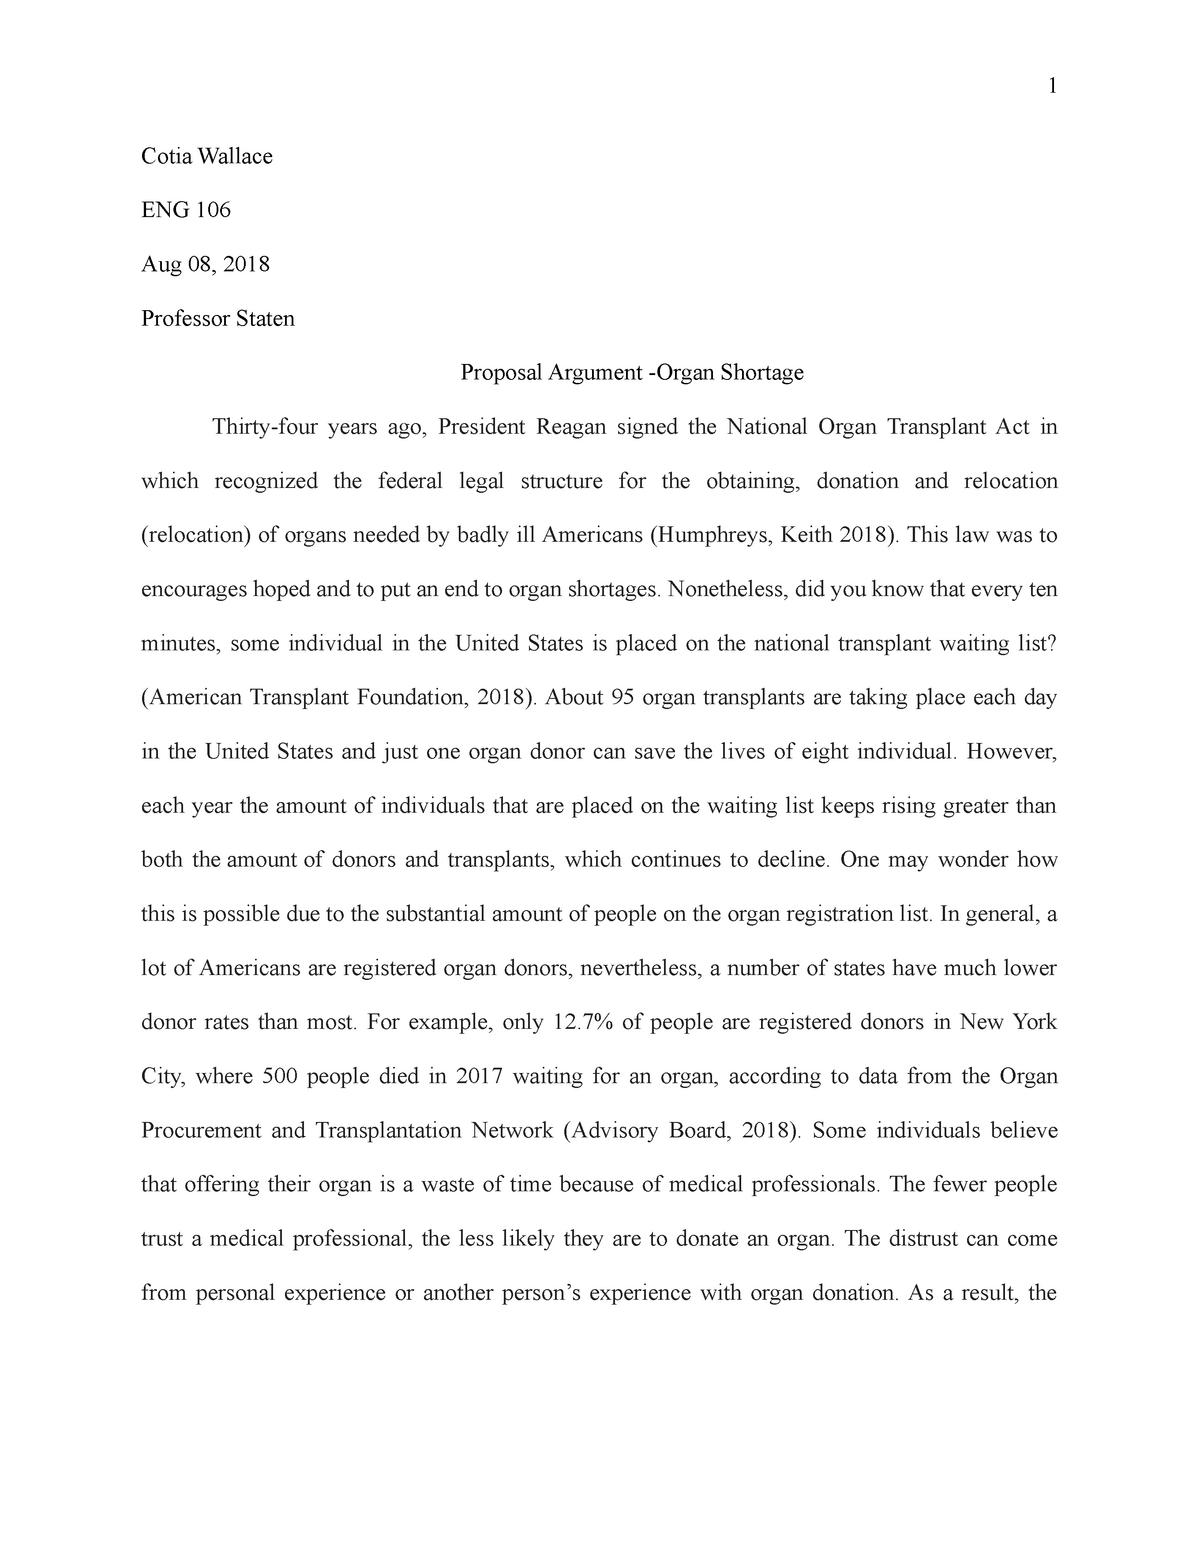 writing a propsal for argument of fact english essay